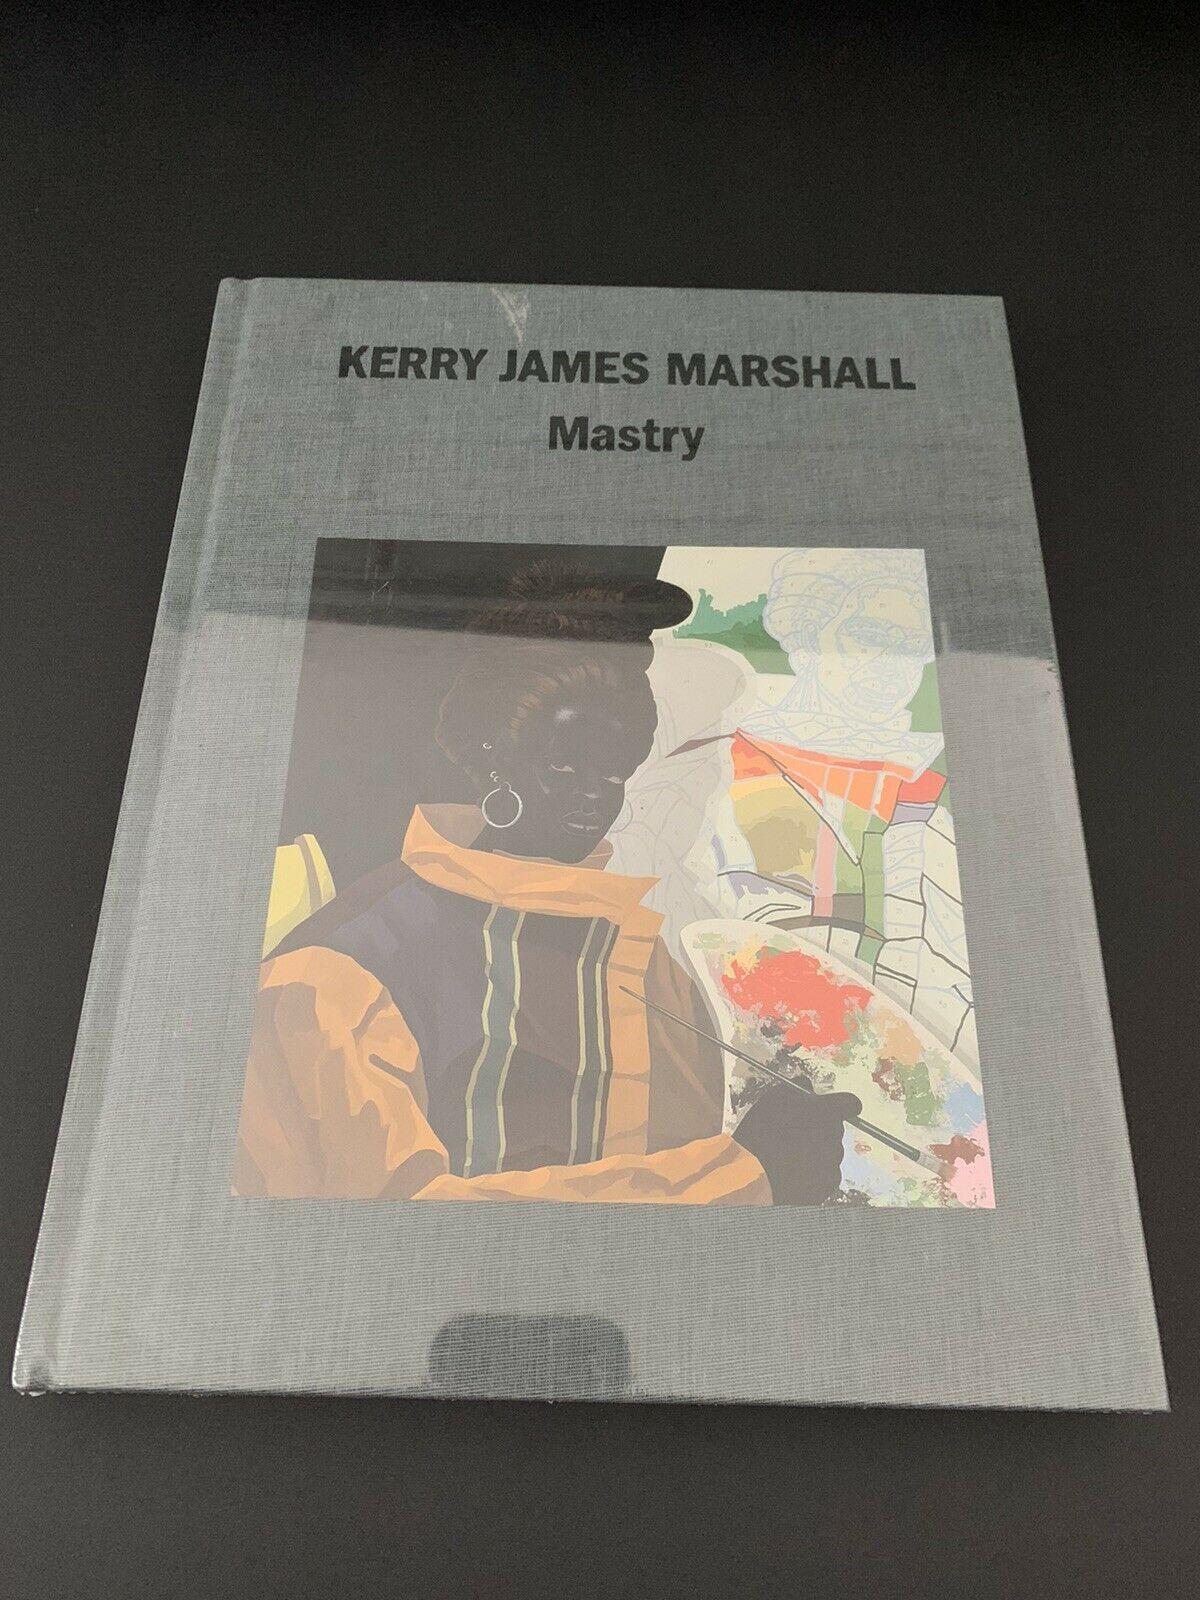 Mastry New and Sealed Exhibition Hardcover Catalogue - Art by Kerry James Marshall